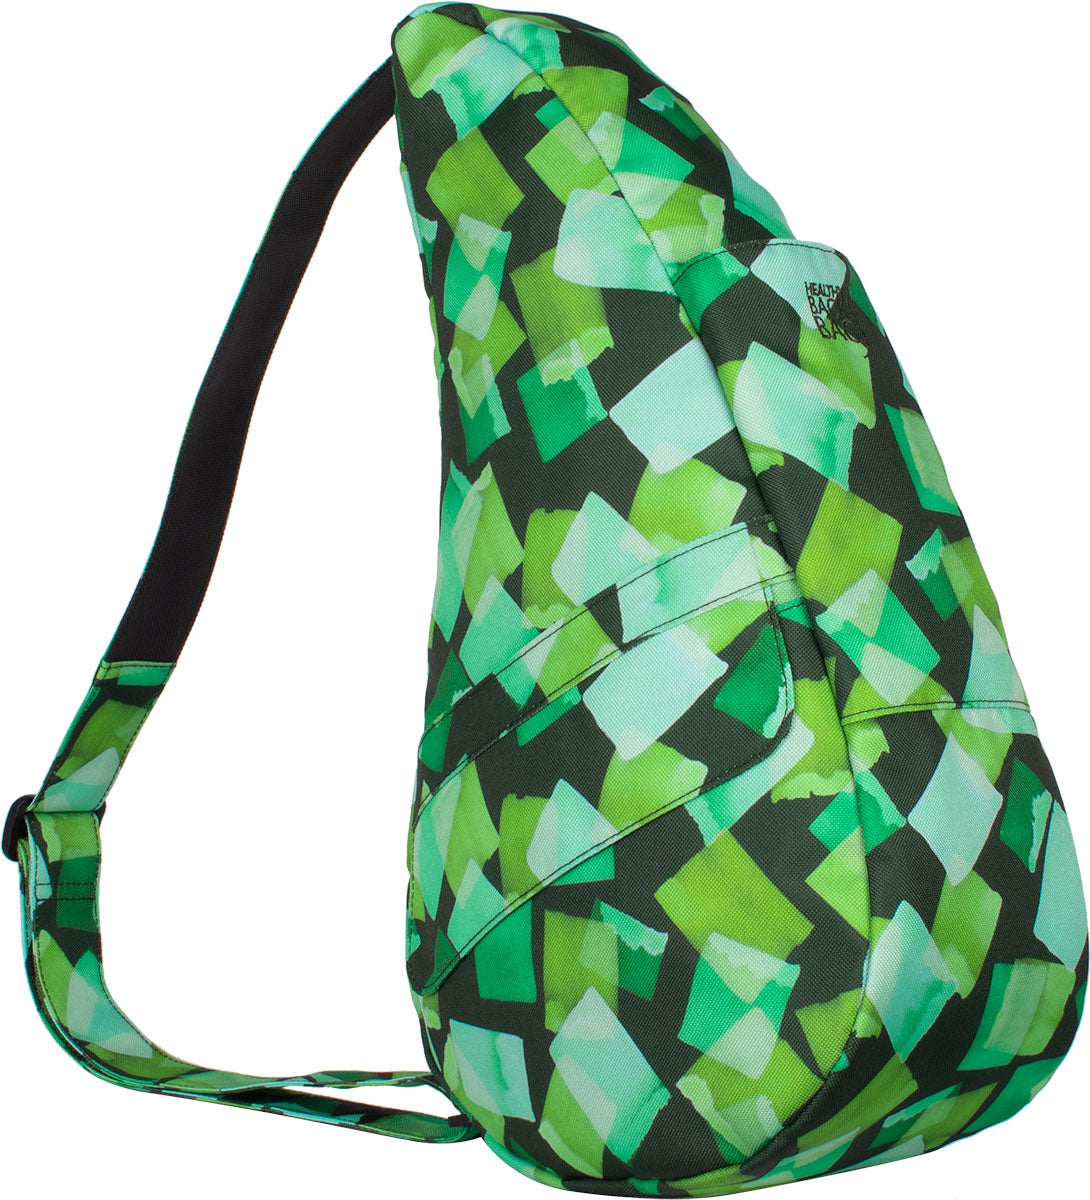 Ameribag Small Healthy Back Bag Tote Prints and Patterns Color: Night glow